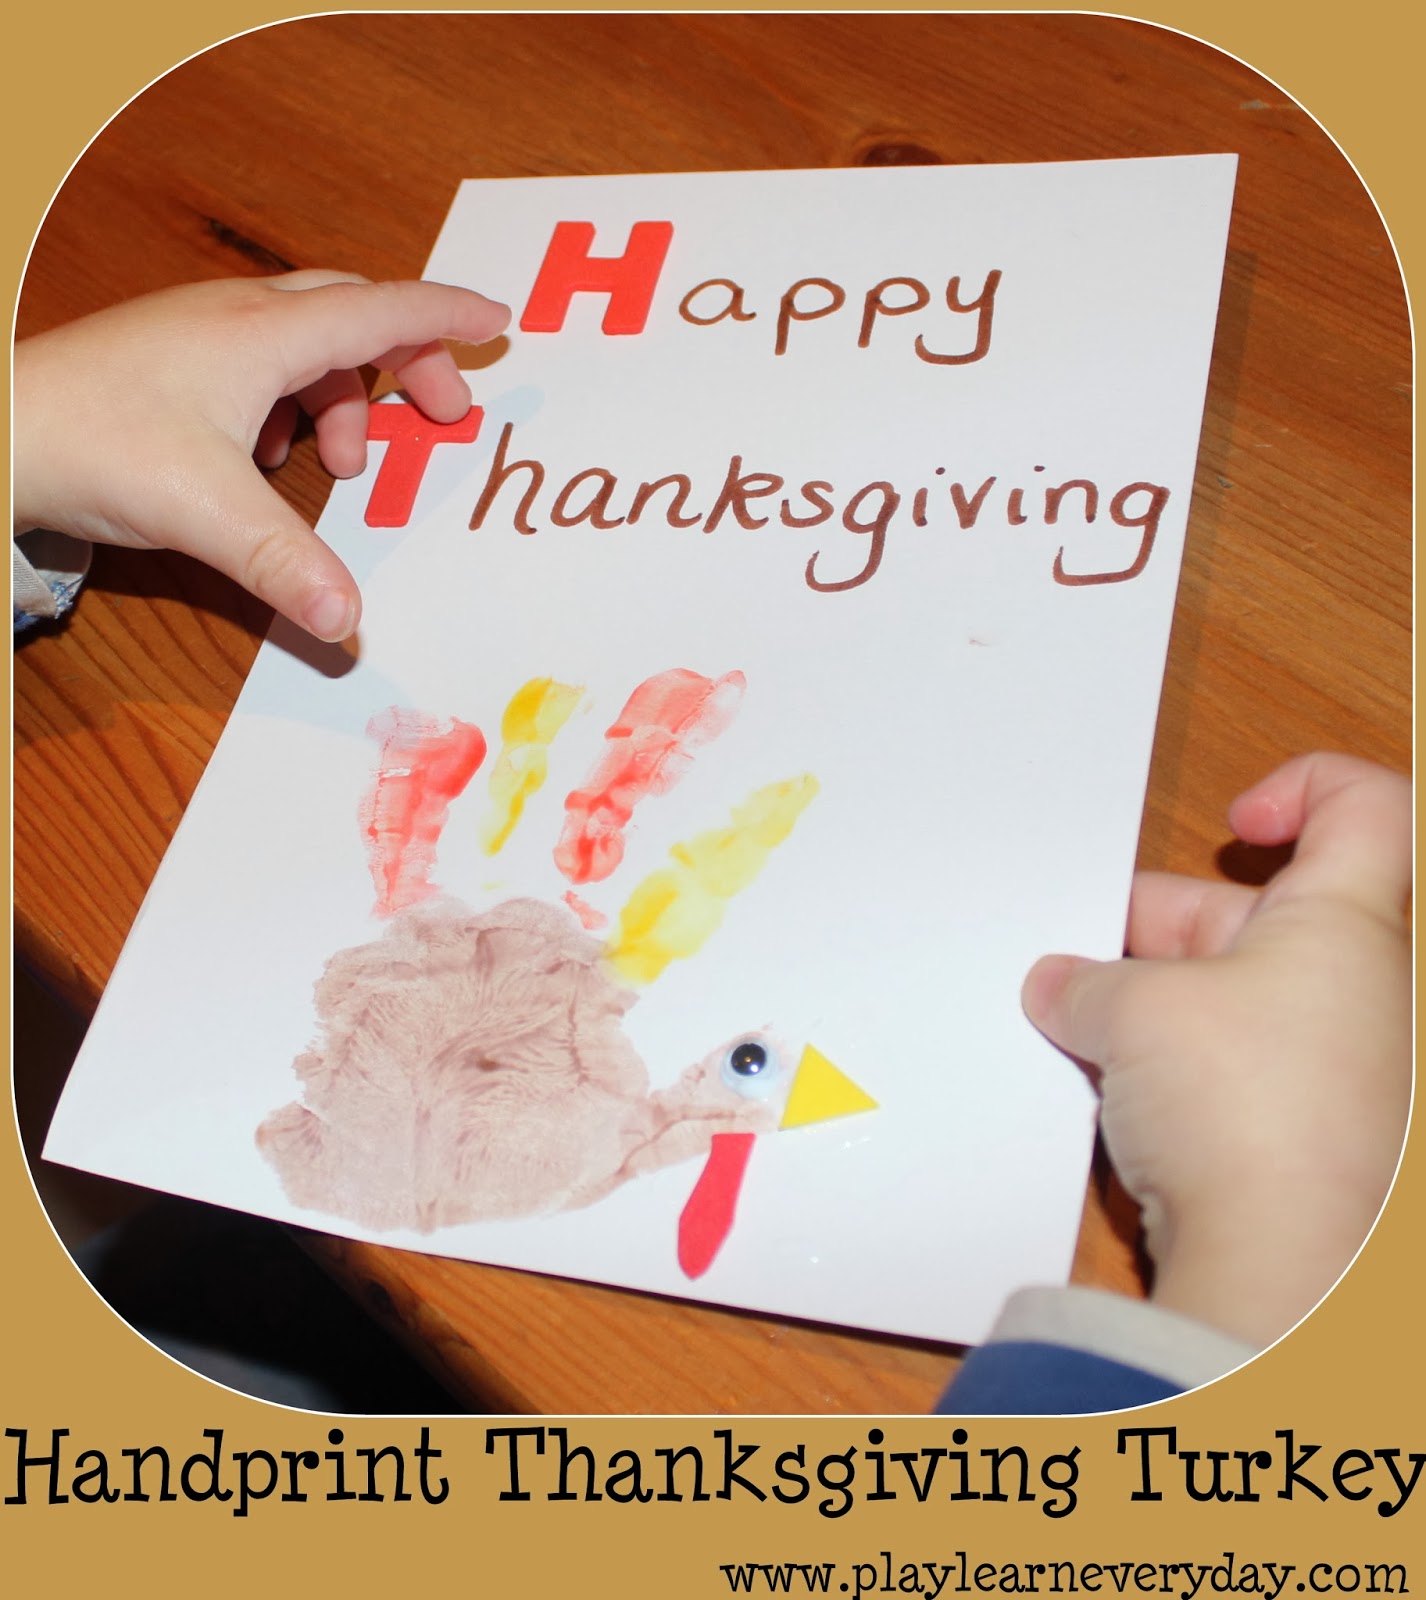 Hand Print Thanksgiving Turkey - Play and Learn Every Day